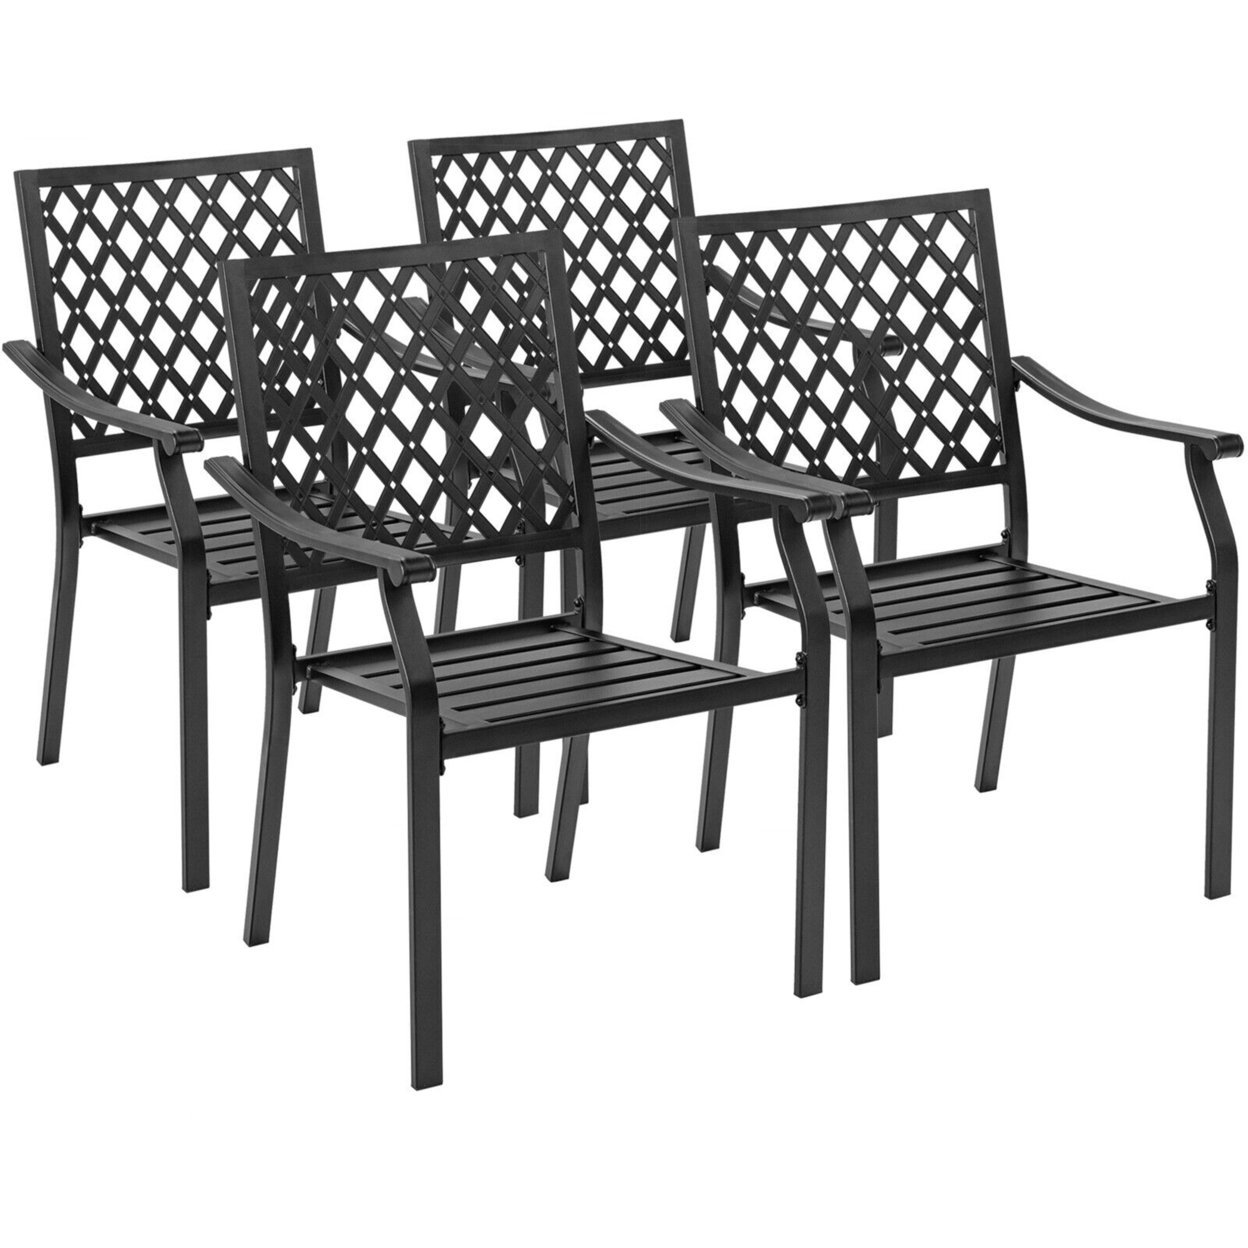 4PCS Stackable Patio Dining Chairs Outdoor Metal Bistro Chairs W/ Curved Armrests